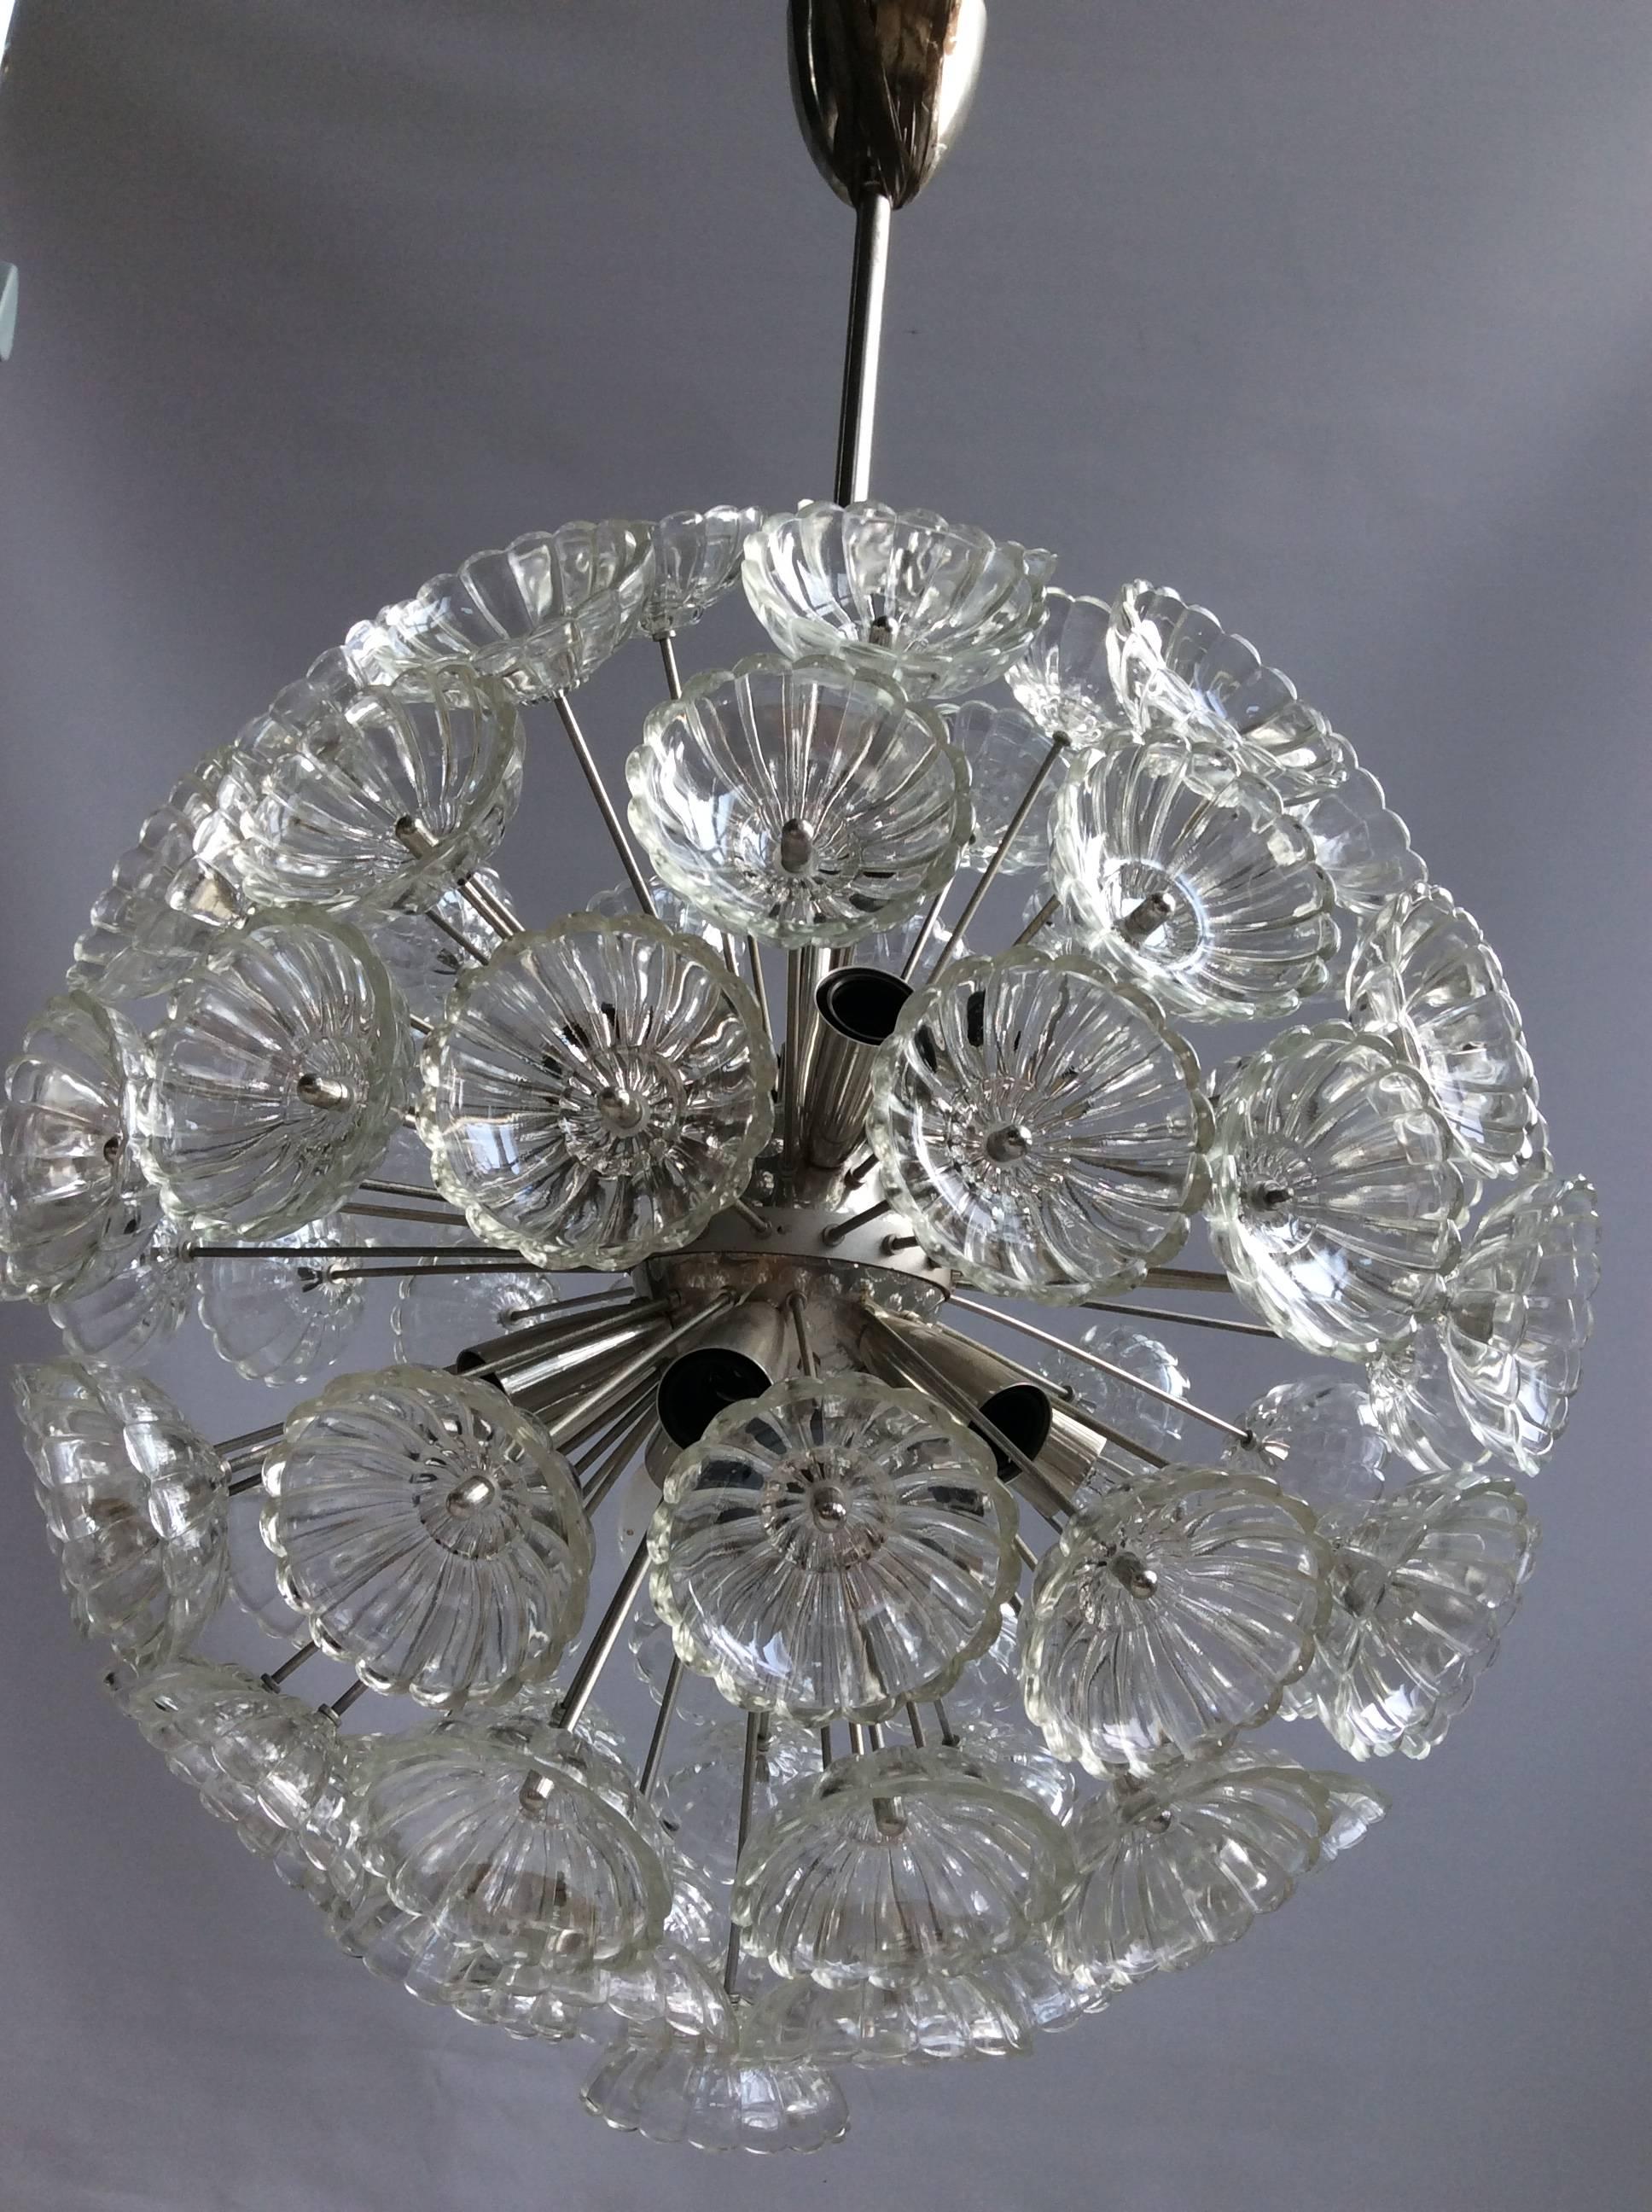 Beautiful designed sputnik chandelier from the early 1970s

Larger than usual at 50cm across, with 78 glass flowers on a chrome sputnik frame

The lamp takes 14 small Edison base bulbs.